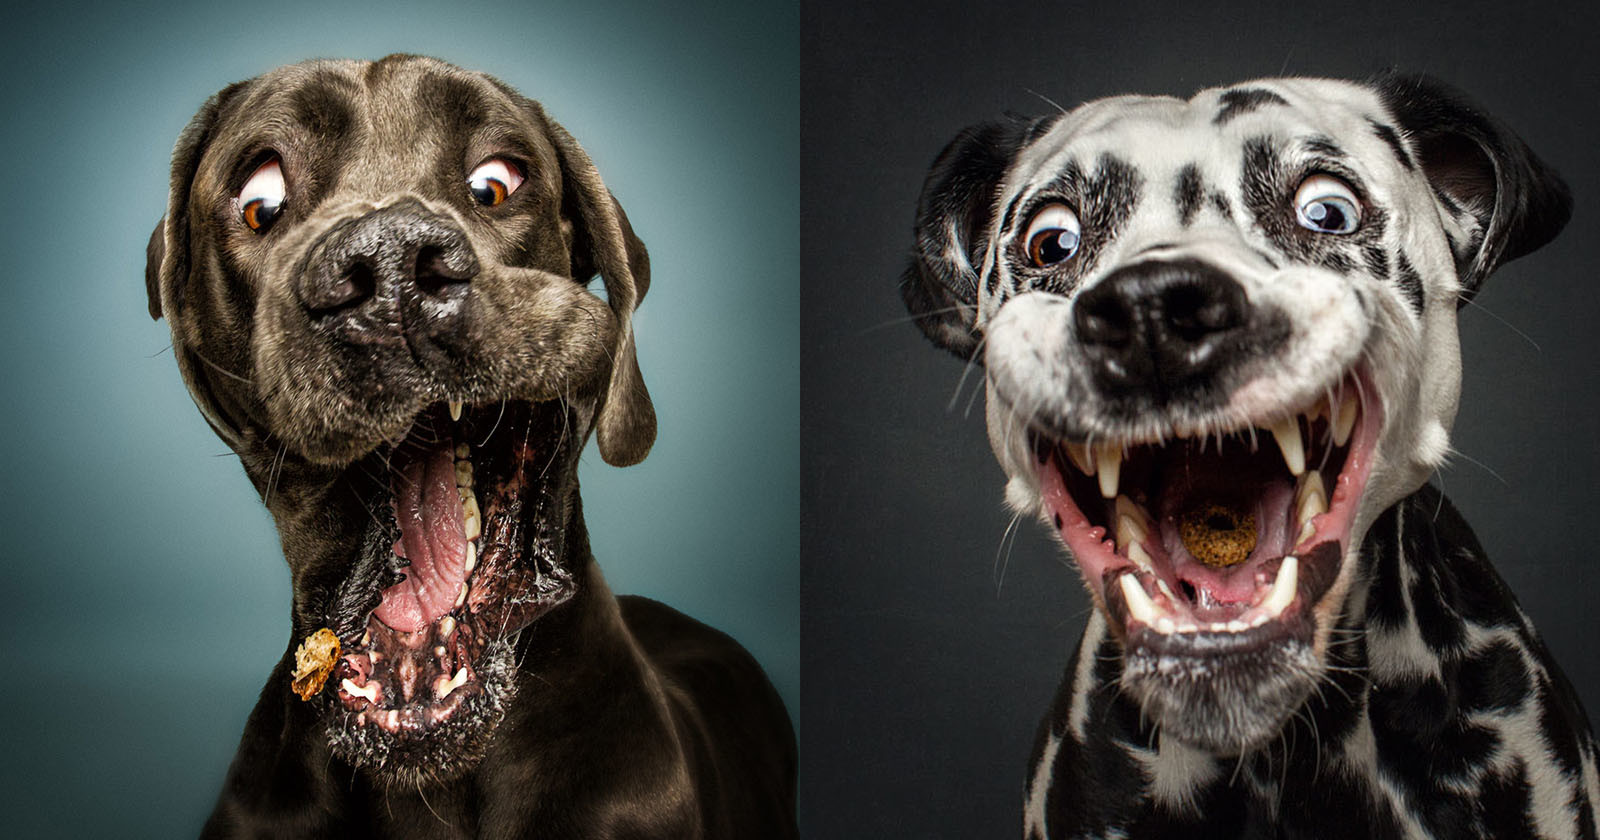  humorous photos dogs catching flying treats 